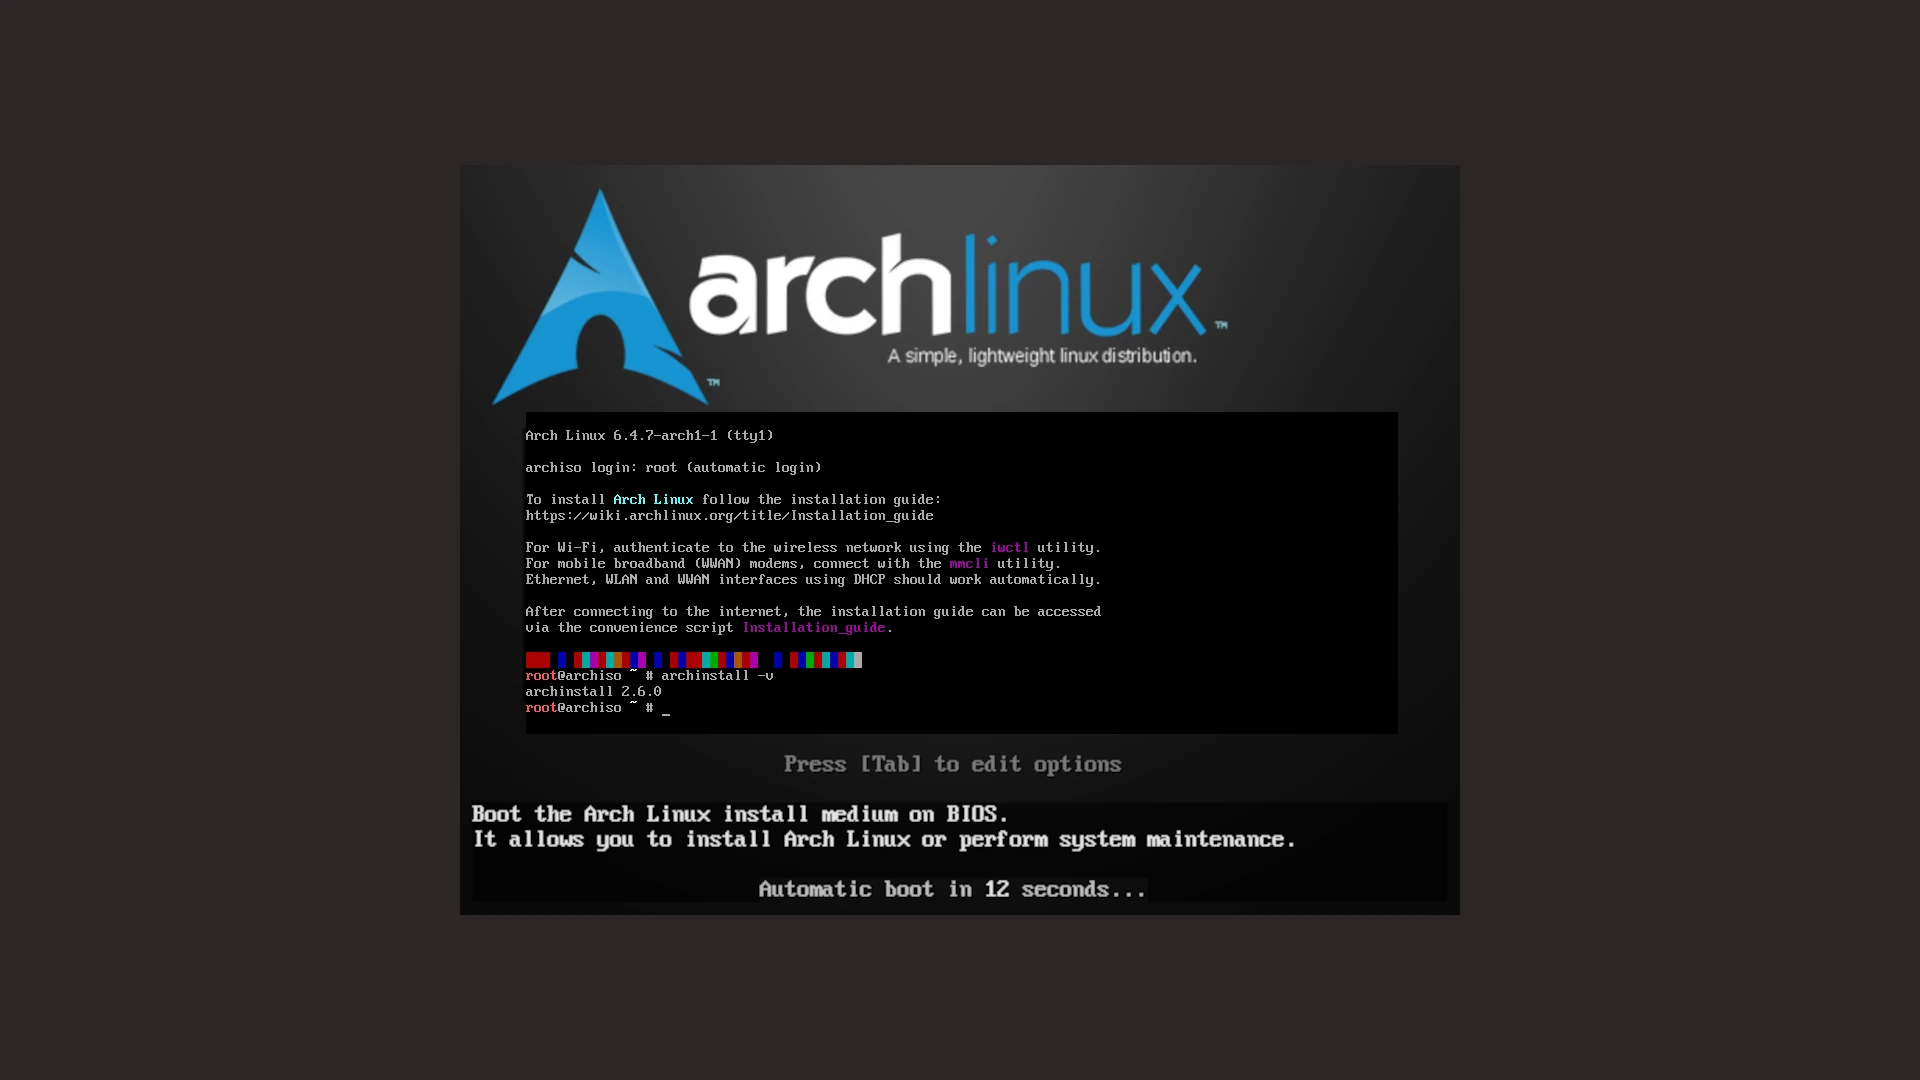 Arch Linux 2023.08.01 Released with Linux Kernel 6.4 and Archinstall 2.6